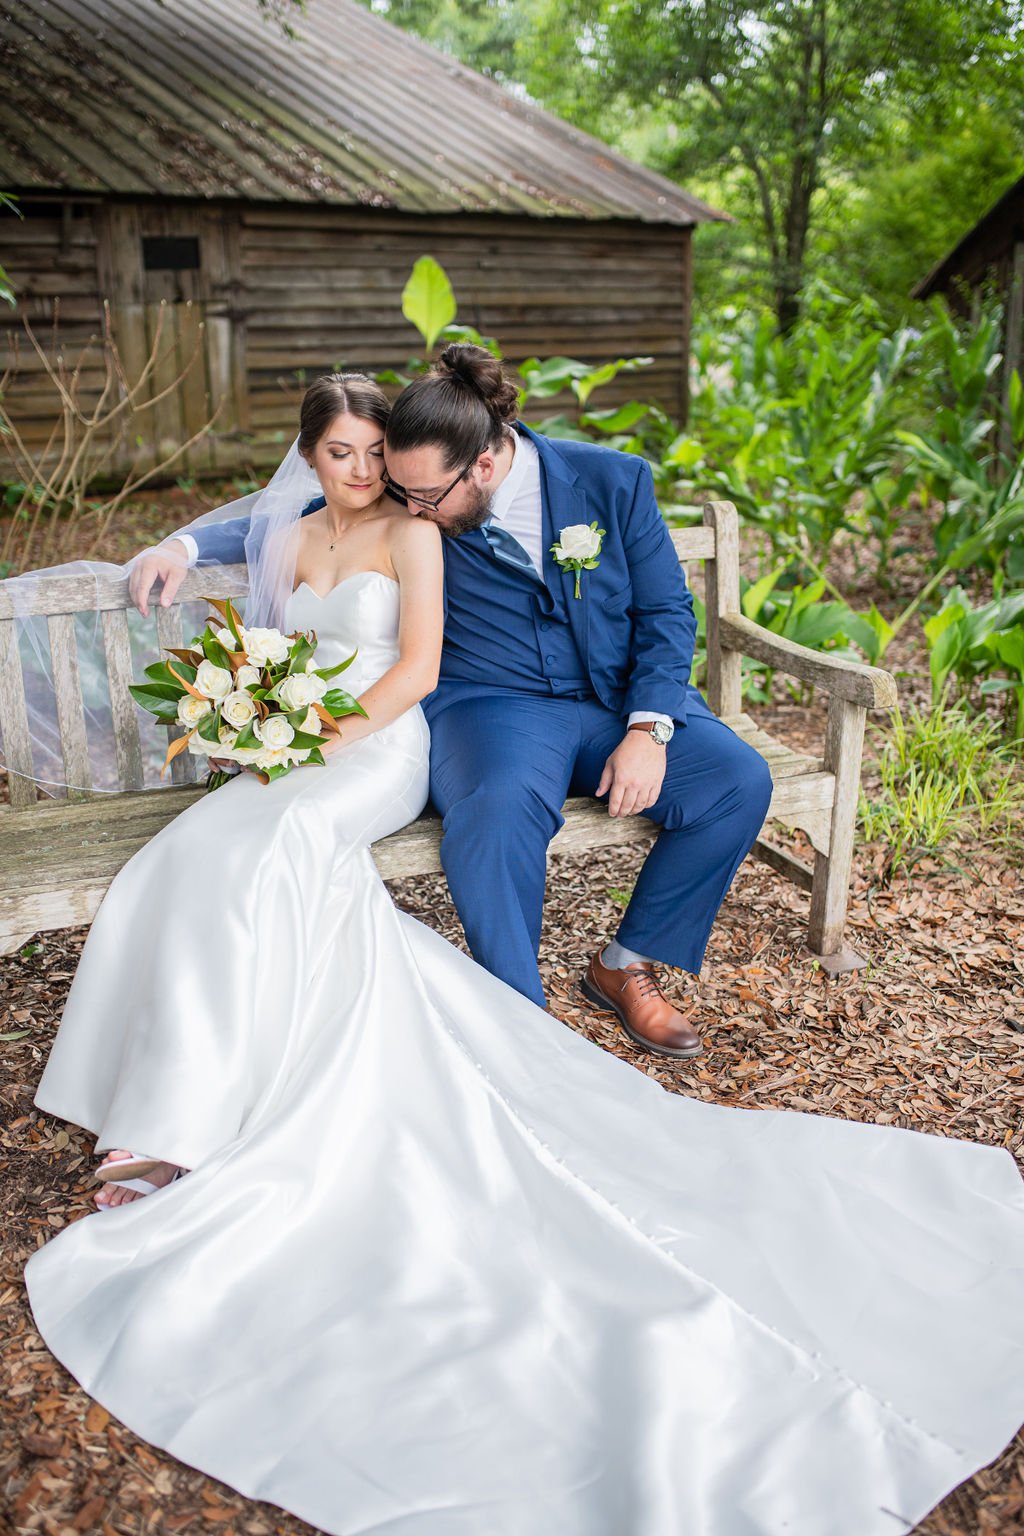 ivory-and-beau-bride-rachel-in-pippa-by-rebecca-ingram-a-sleek-modern-fitted-mikado-wedding-dress-with-sweetheart-neckline-available-from-savannah-bridal-shop-ivory-and-beau-9.jpg